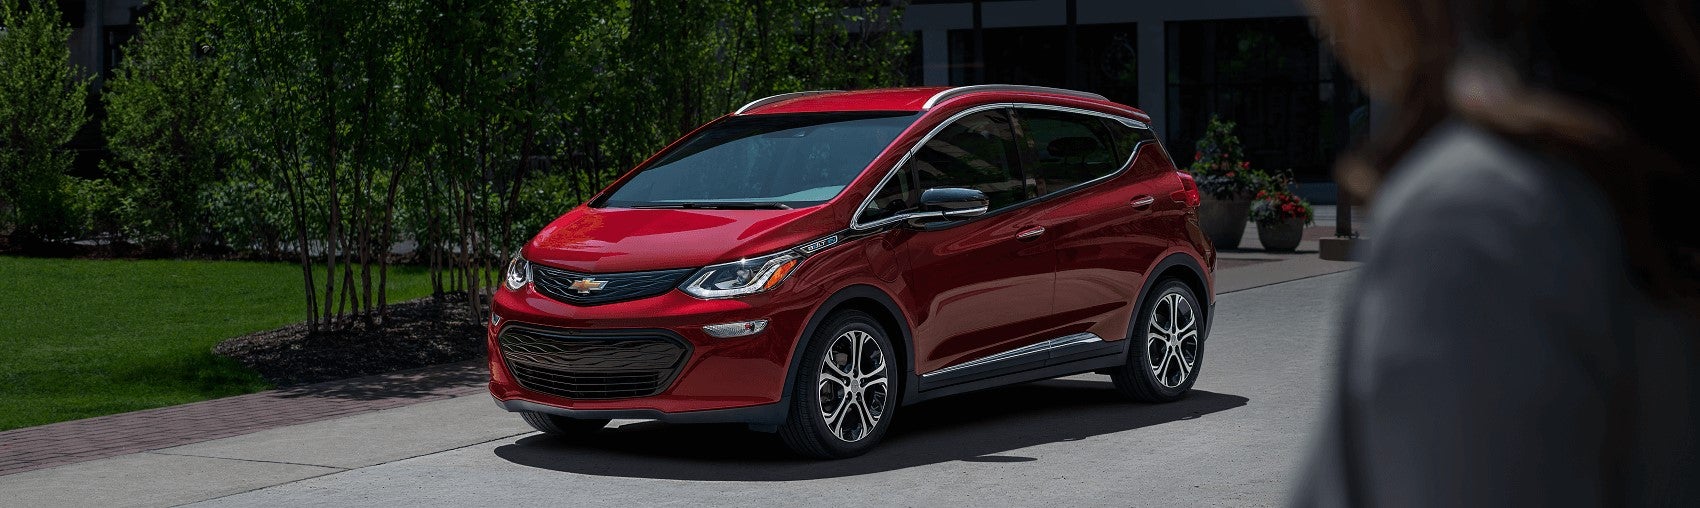 Chevy Bolt for Sale near Columbus OH